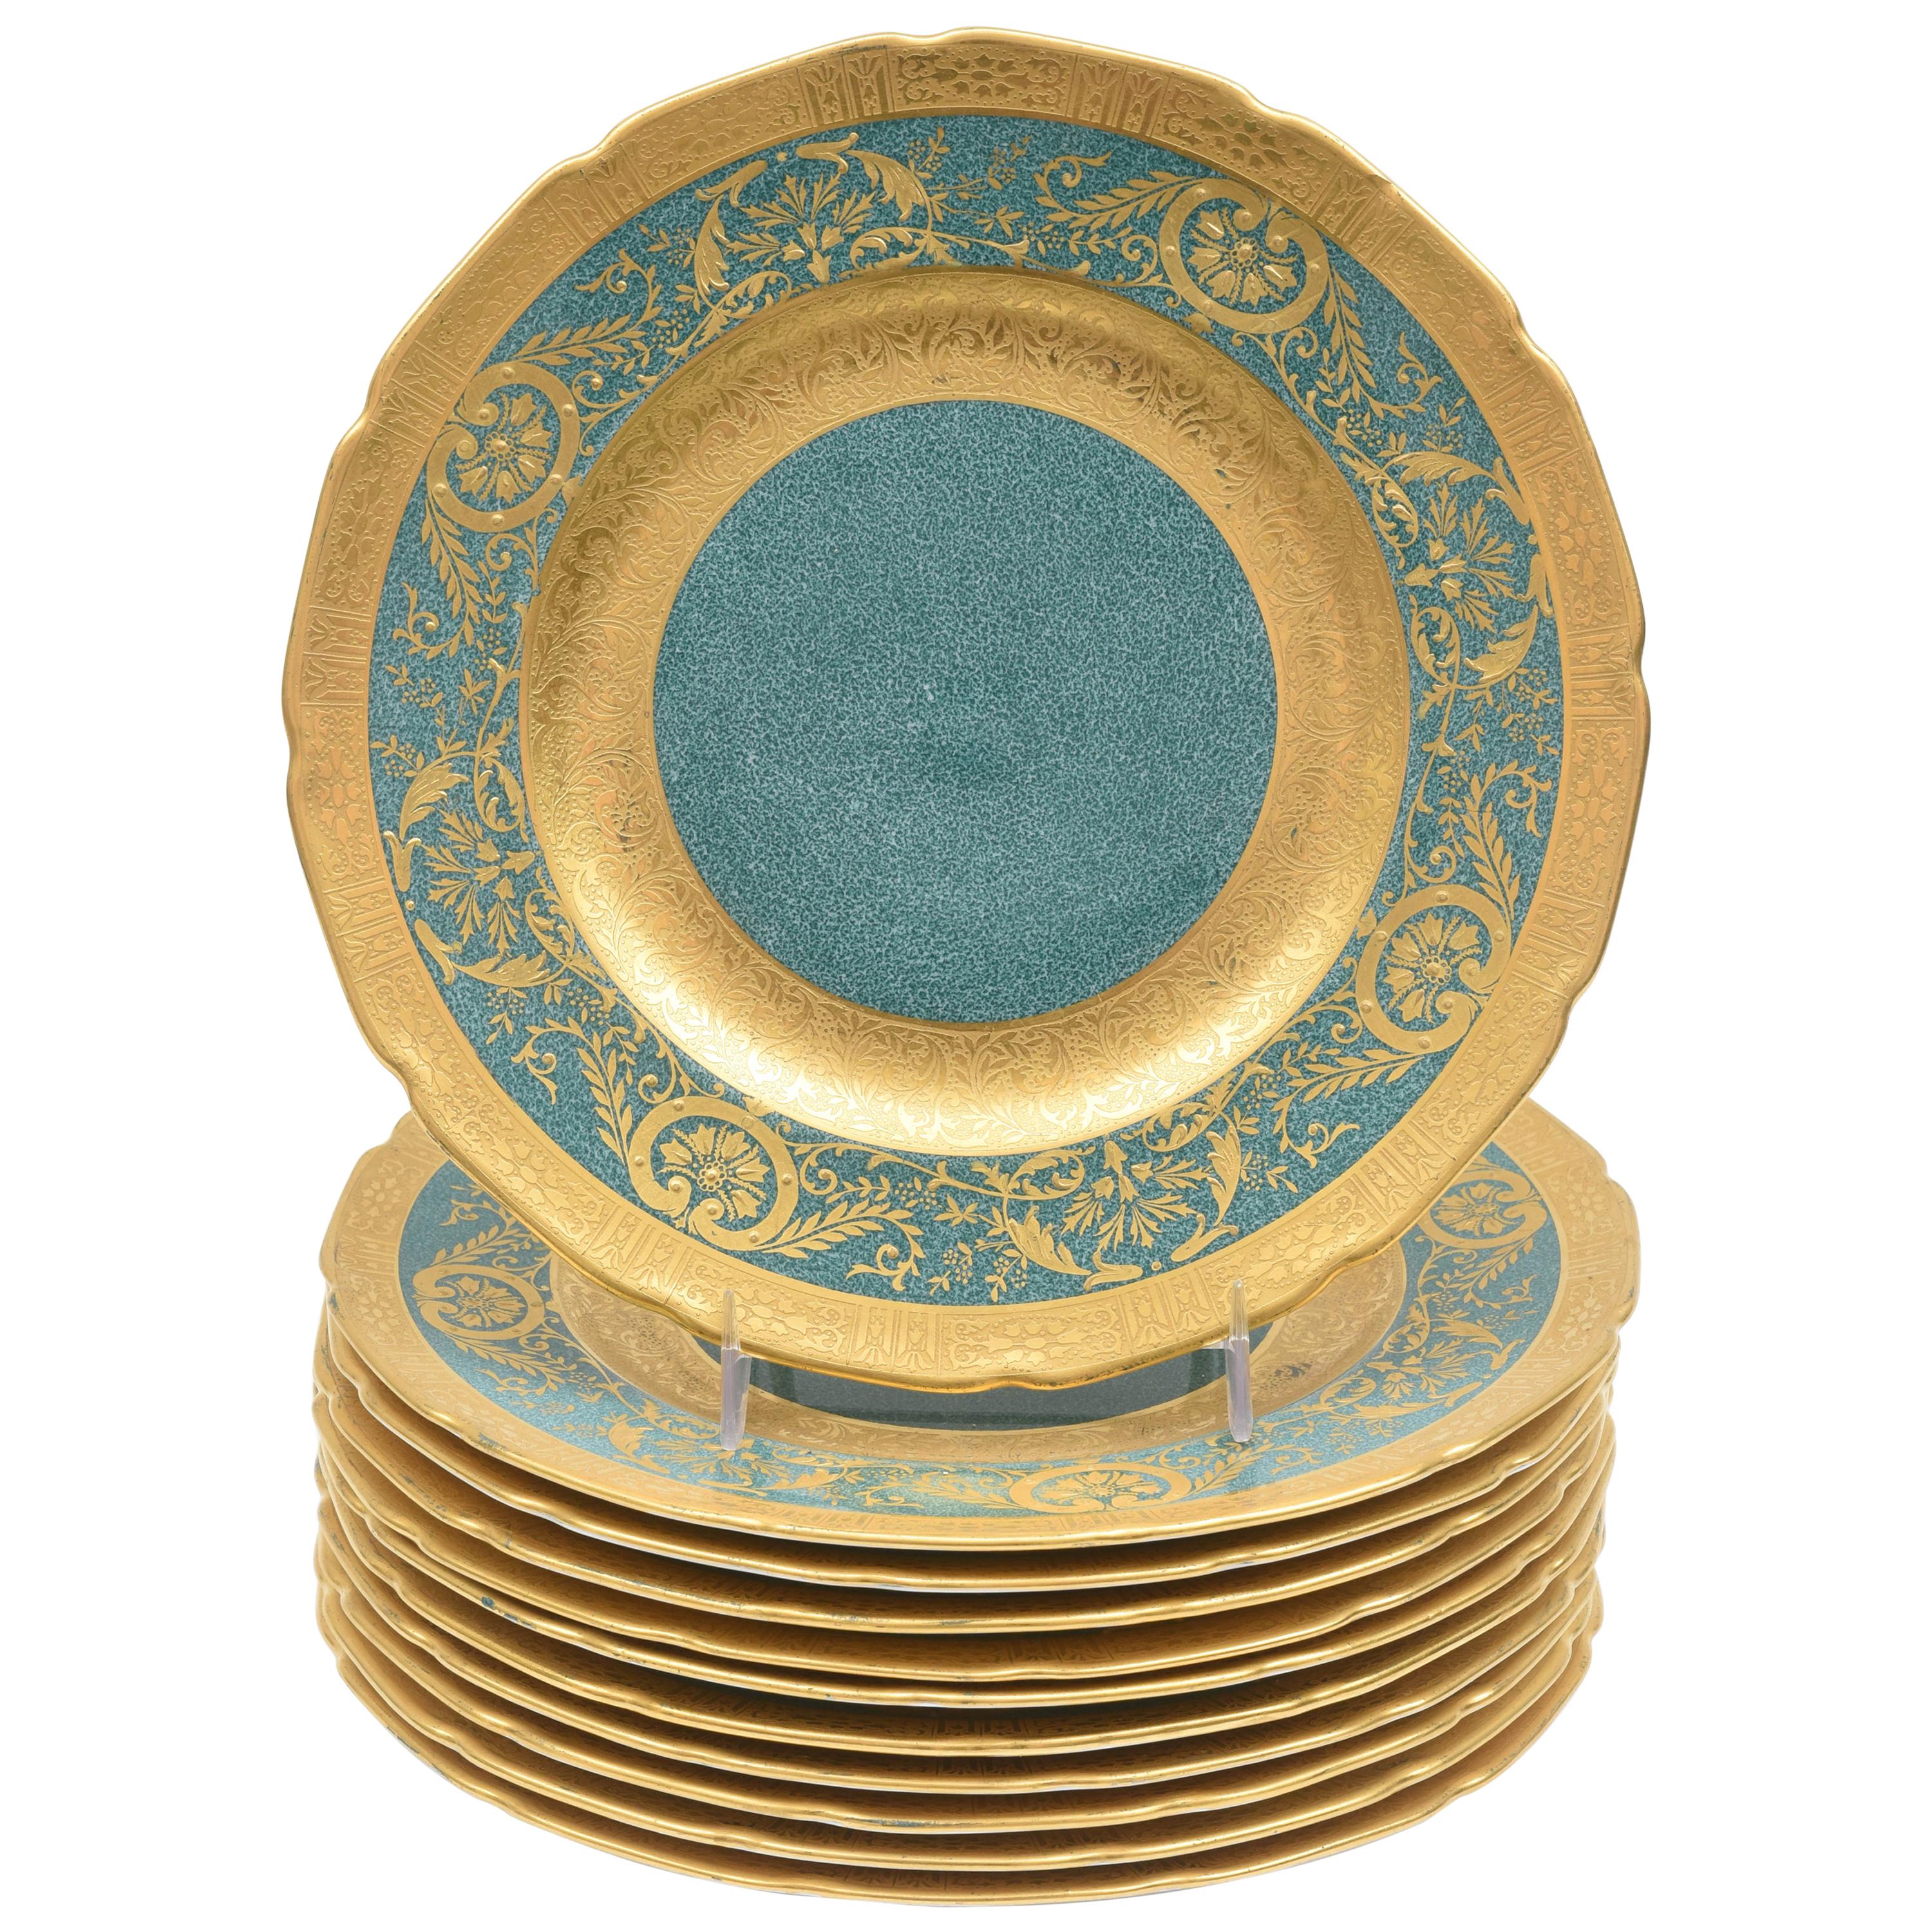 Set of 11 Vibrant Teal or Turquoise Green and Gilt Encrusted Dessert Plates